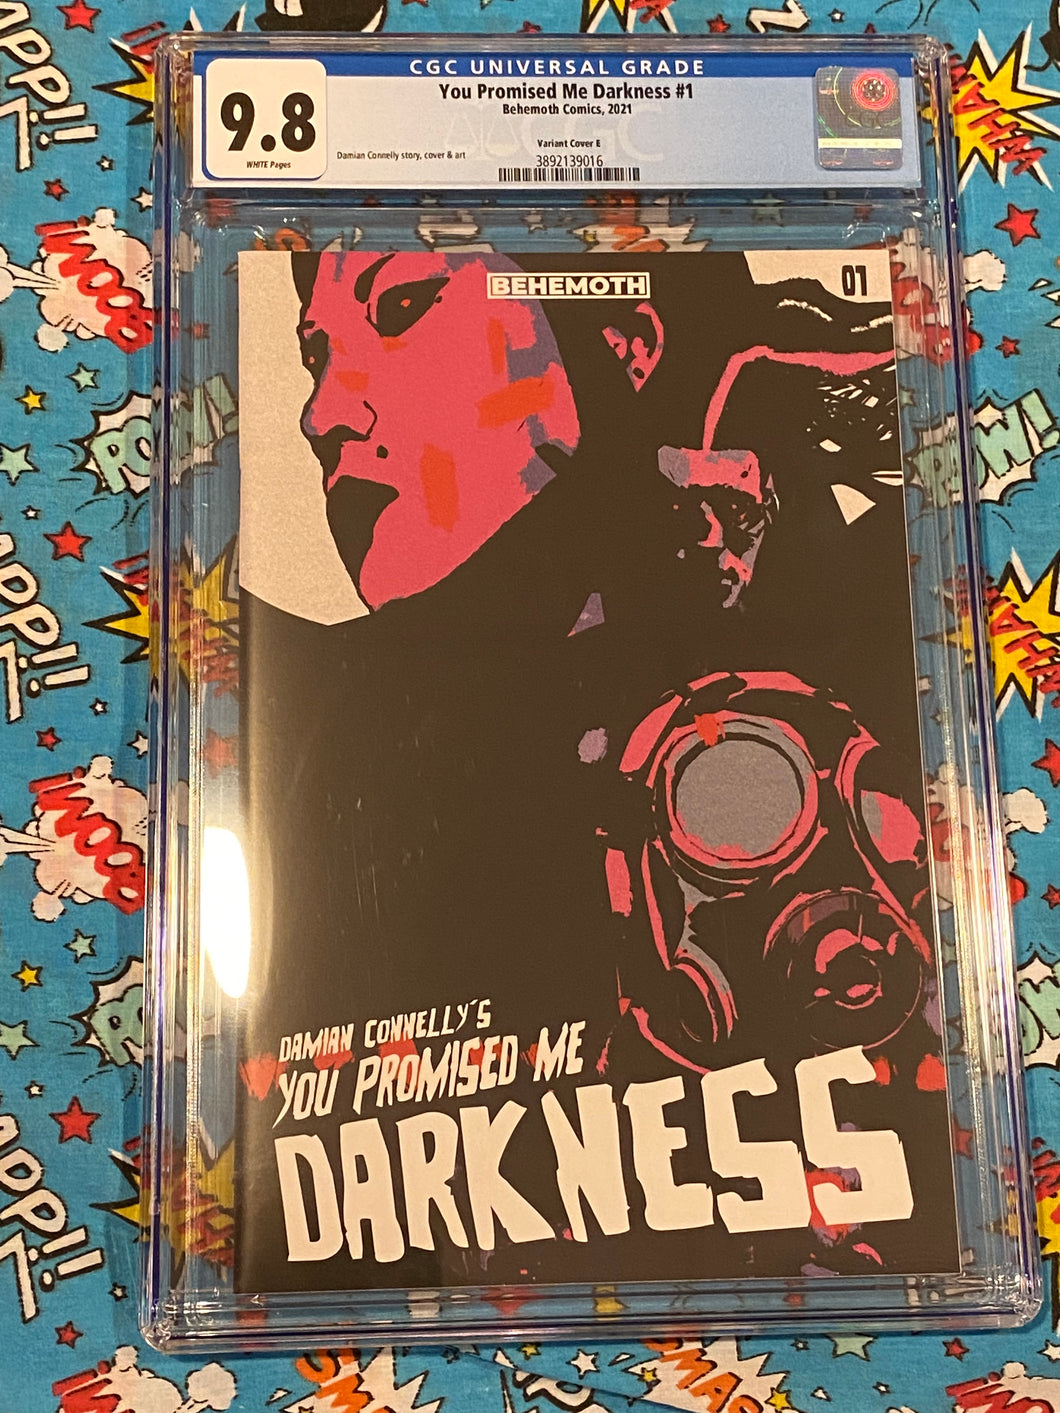 CGC 9.8 - You Promised Me Darkness #1 - Variant cover E - Damian Connelly Story & Art